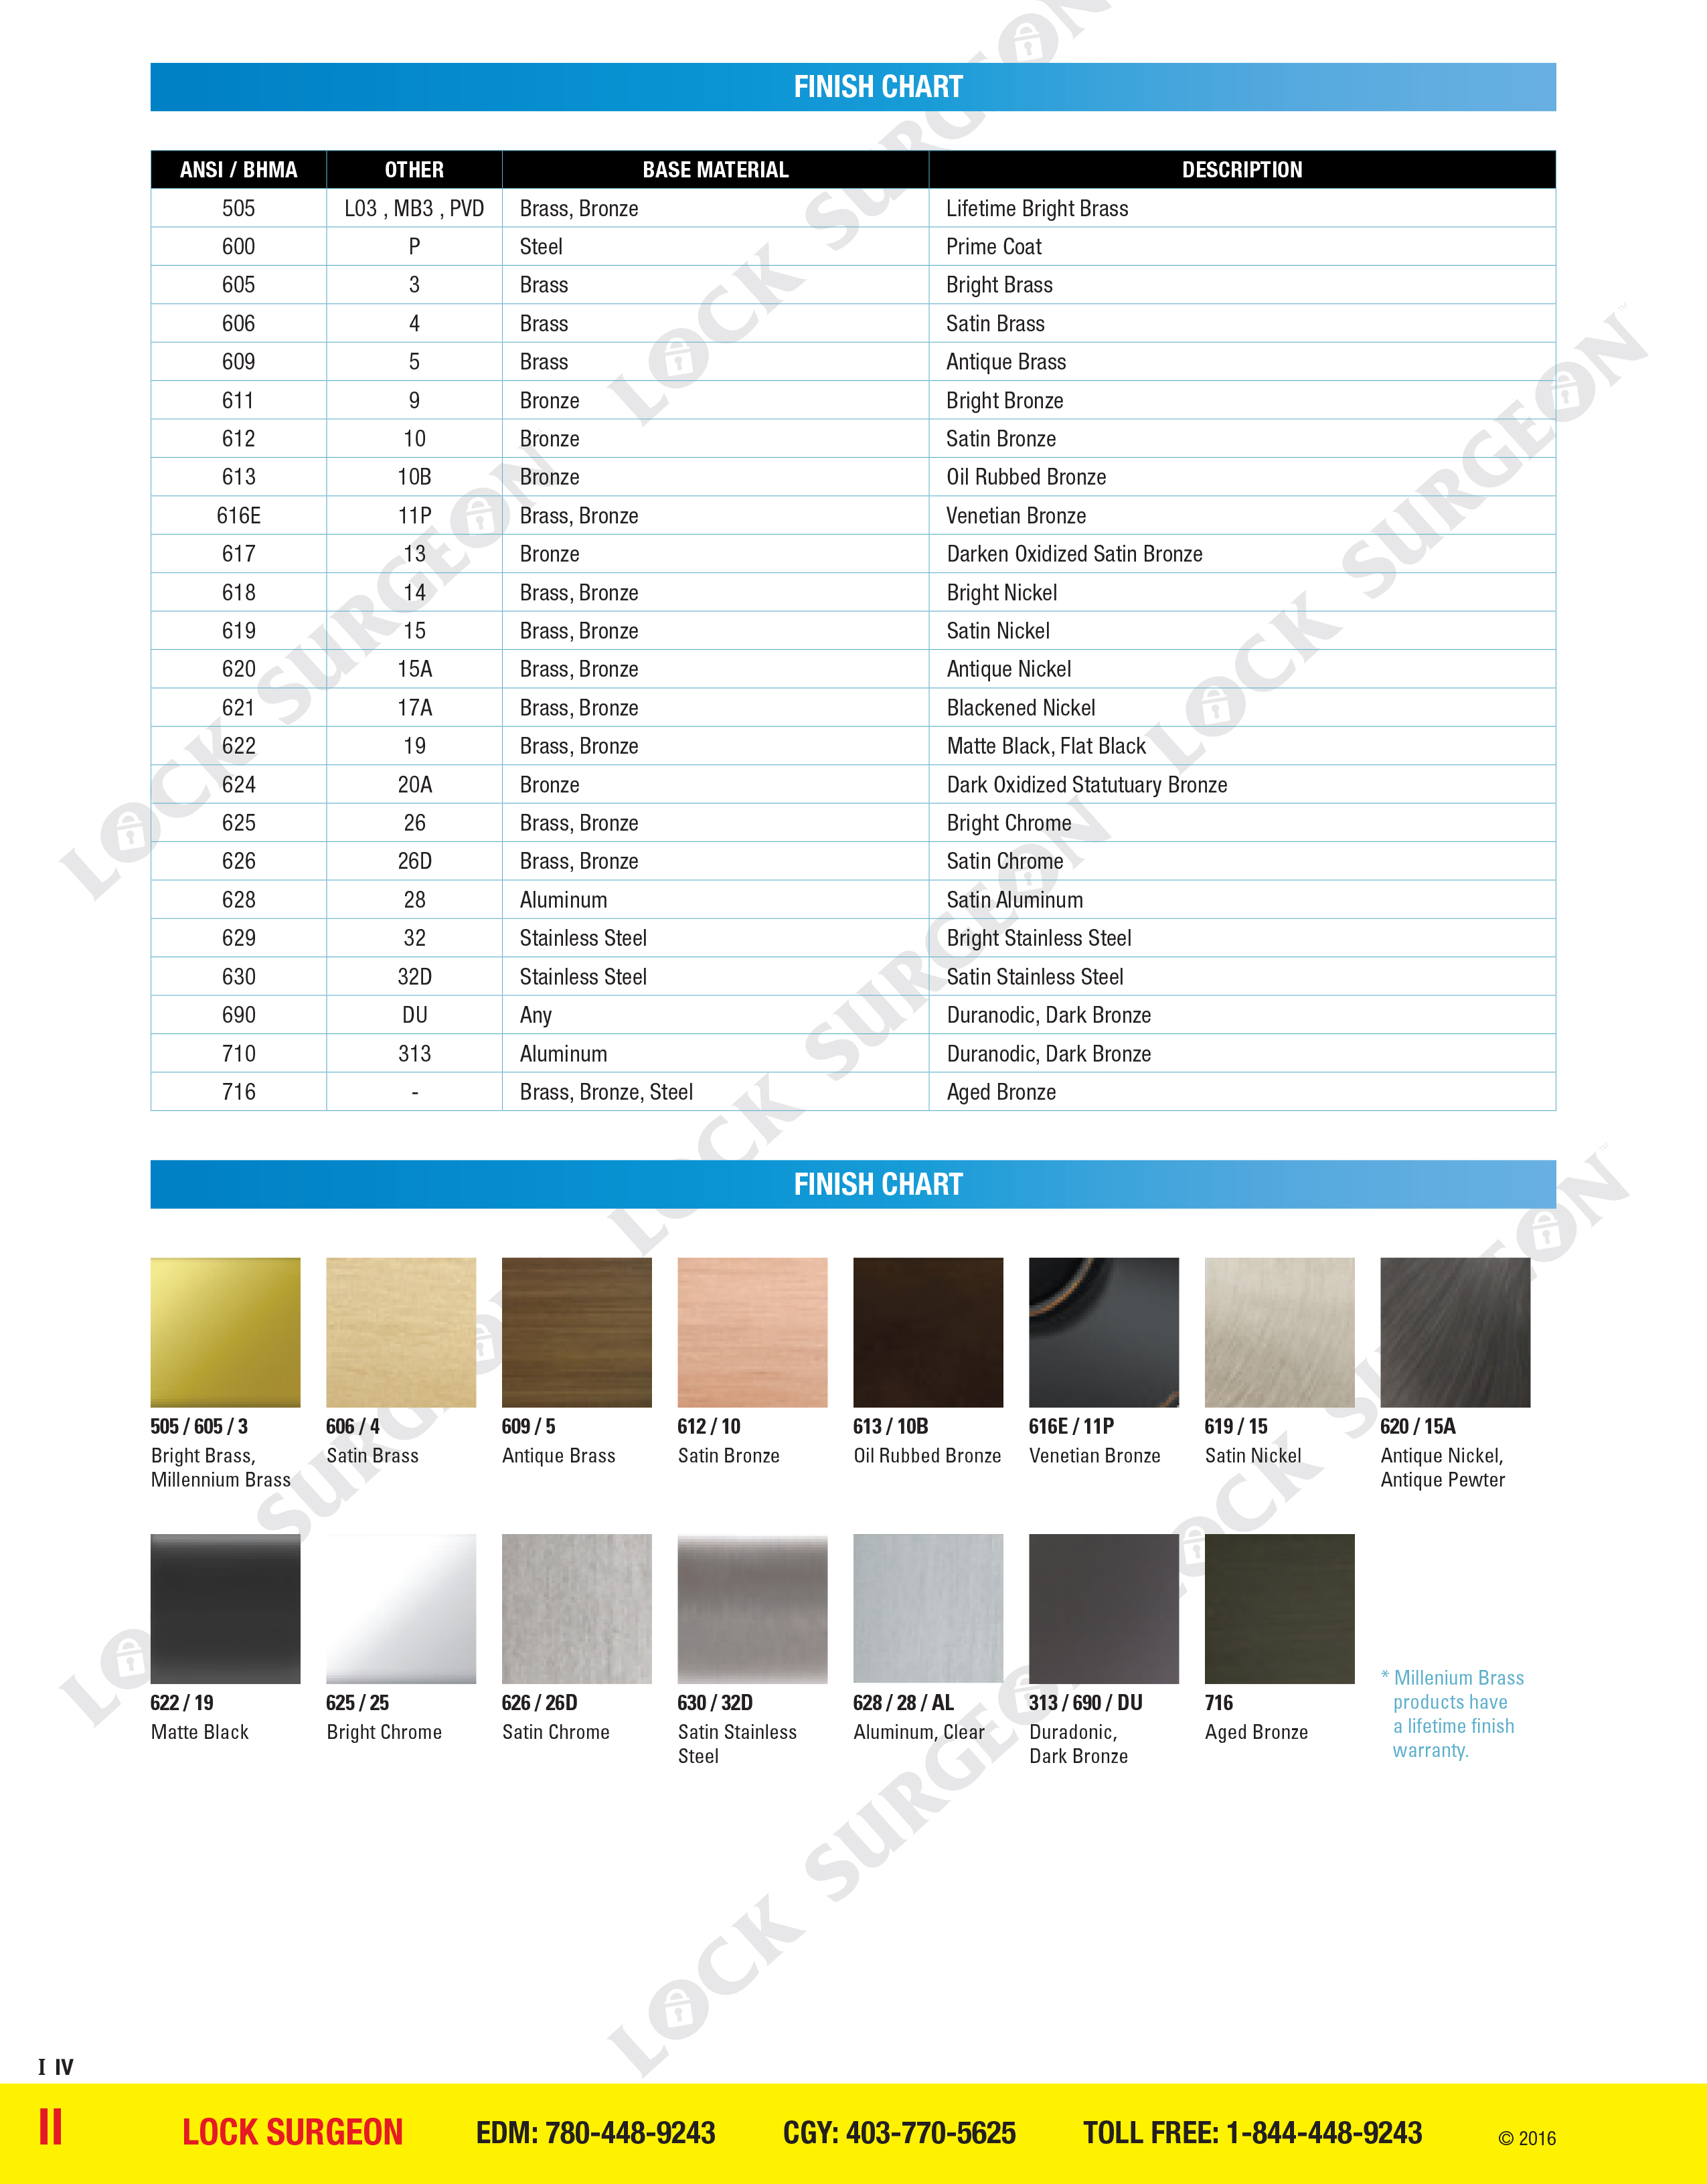 Reference chart for Colour finishes available on a variety of products at Lock Surgeon Airdrie.